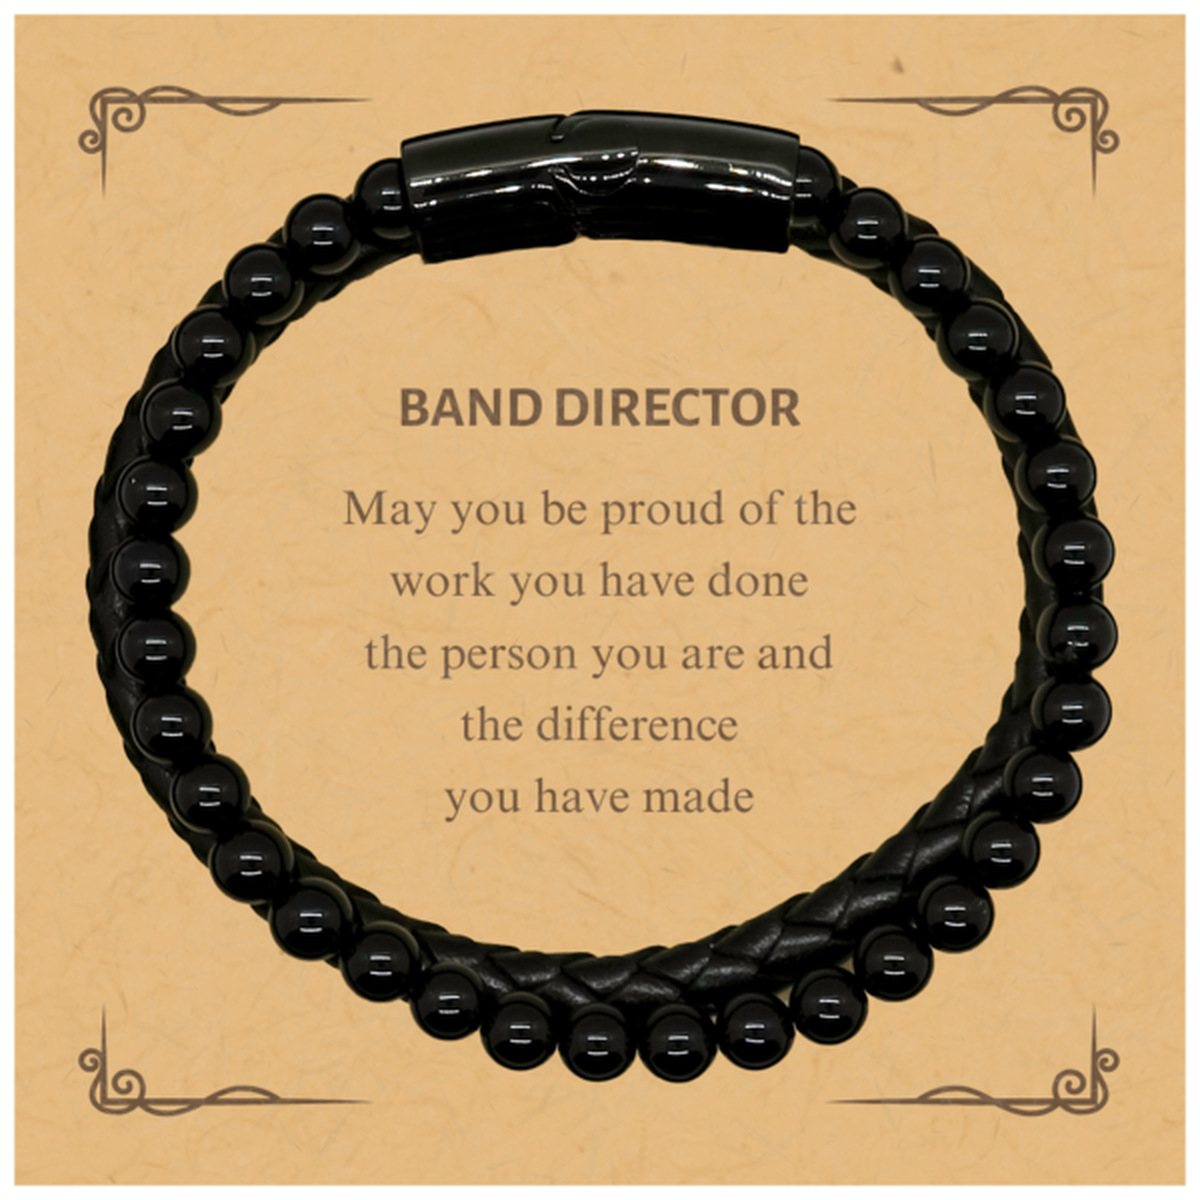 Band Director May you be proud of the work you have done, Retirement Band Director Stone Leather Bracelets for Colleague Appreciation Gifts Amazing for Band Director